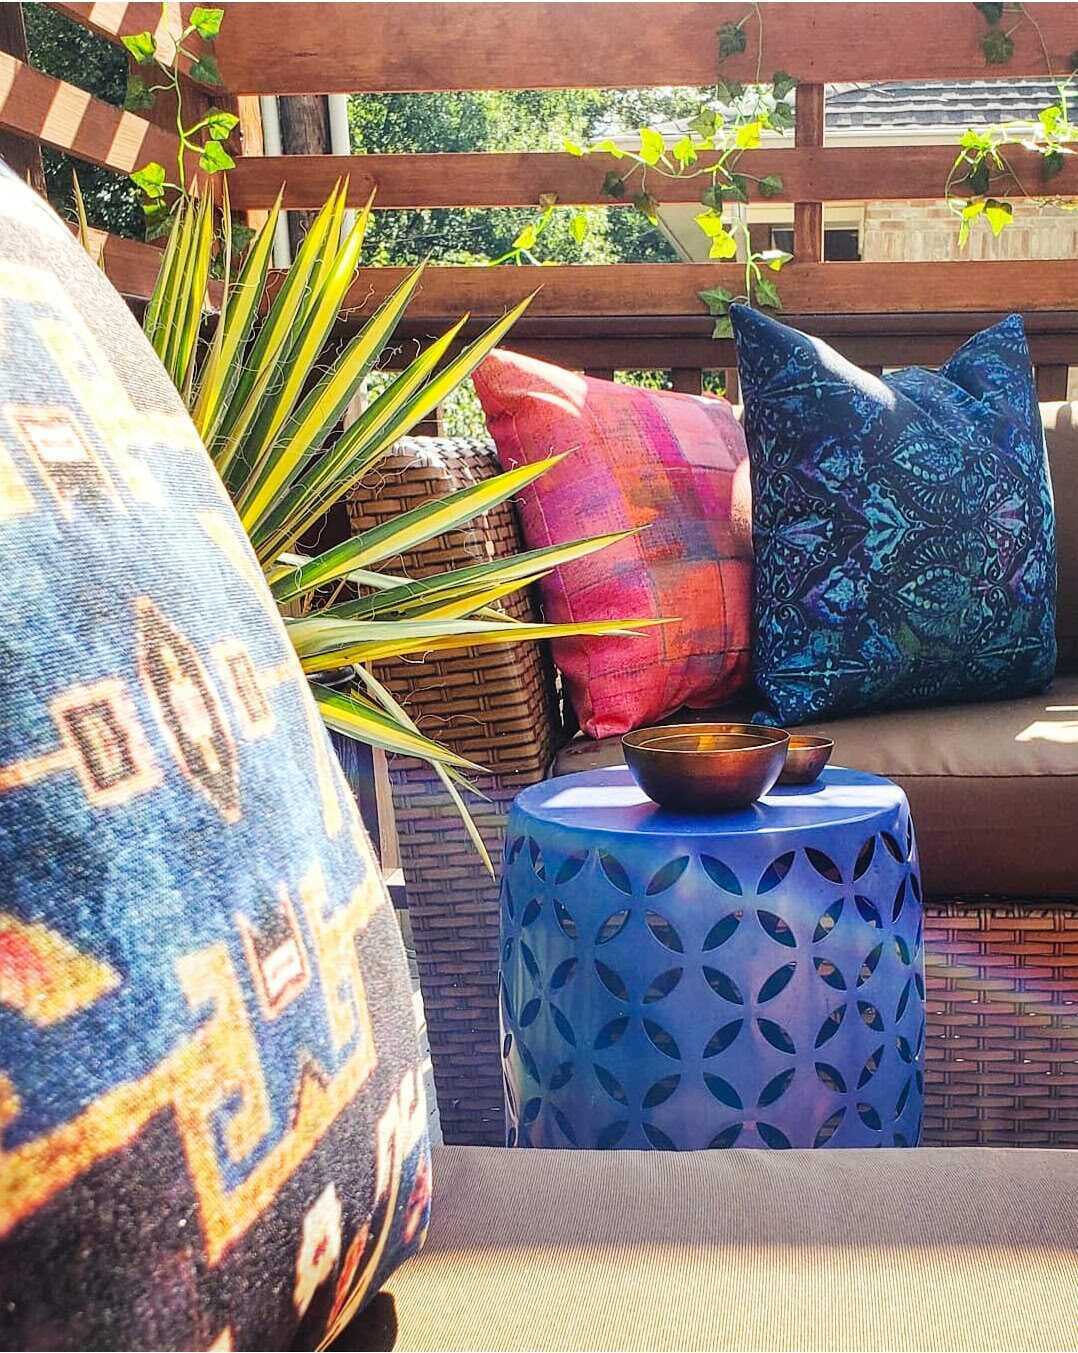 SmithHönig friend and designer Seana Freeman is embracing bold color, pattern and influences from around the world this fall season. To add to her glamorous deck refresh, Freeman turned to our exclusive line of outdoor pillows to fit in with her look and quality. Read on to see how you too can refresh your outdoor space with new fall decor.